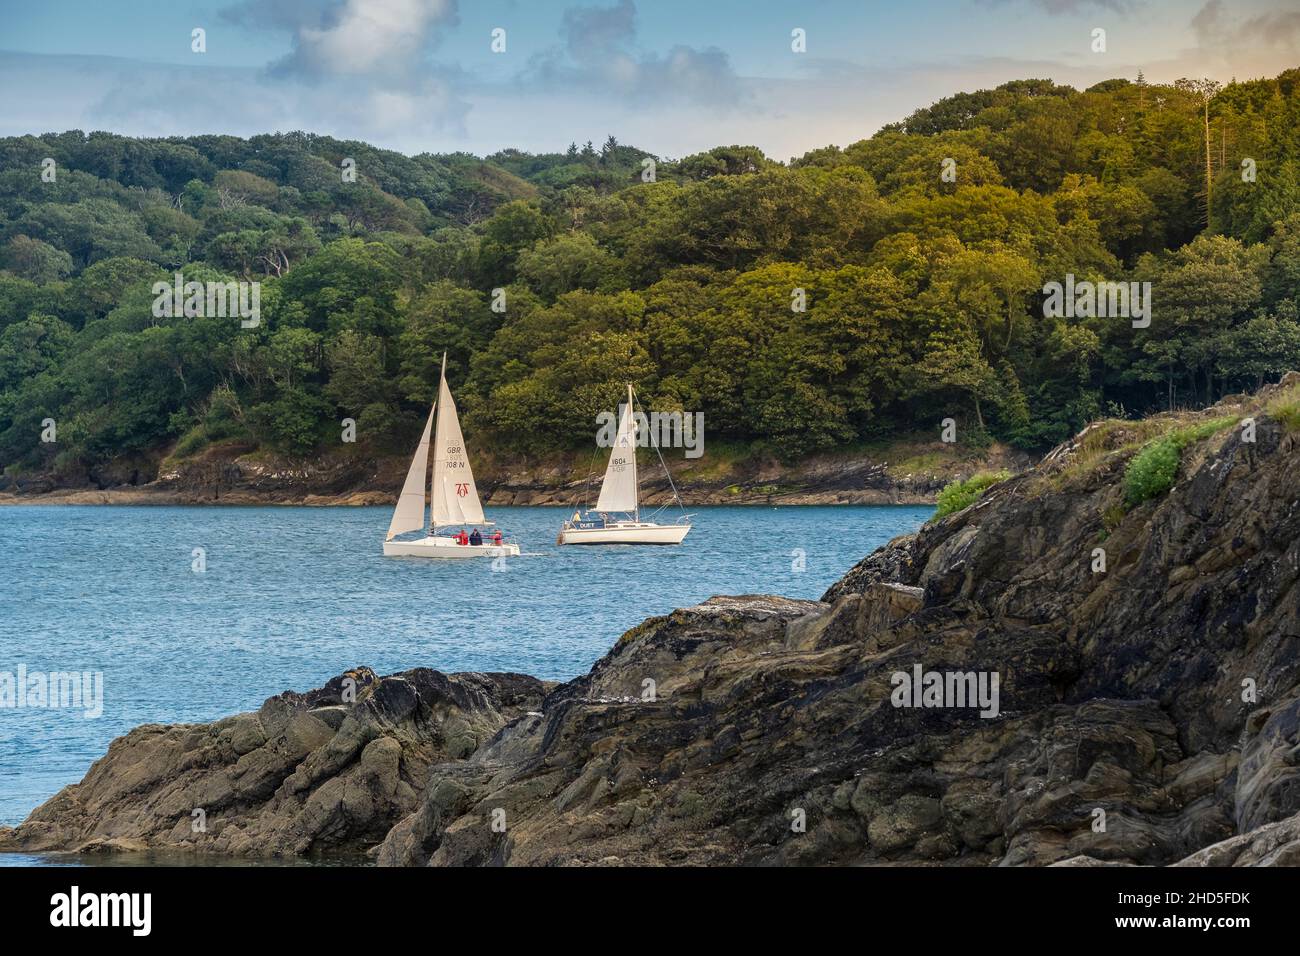 Sailboats on the Helford River in Cornwall. Stock Photo